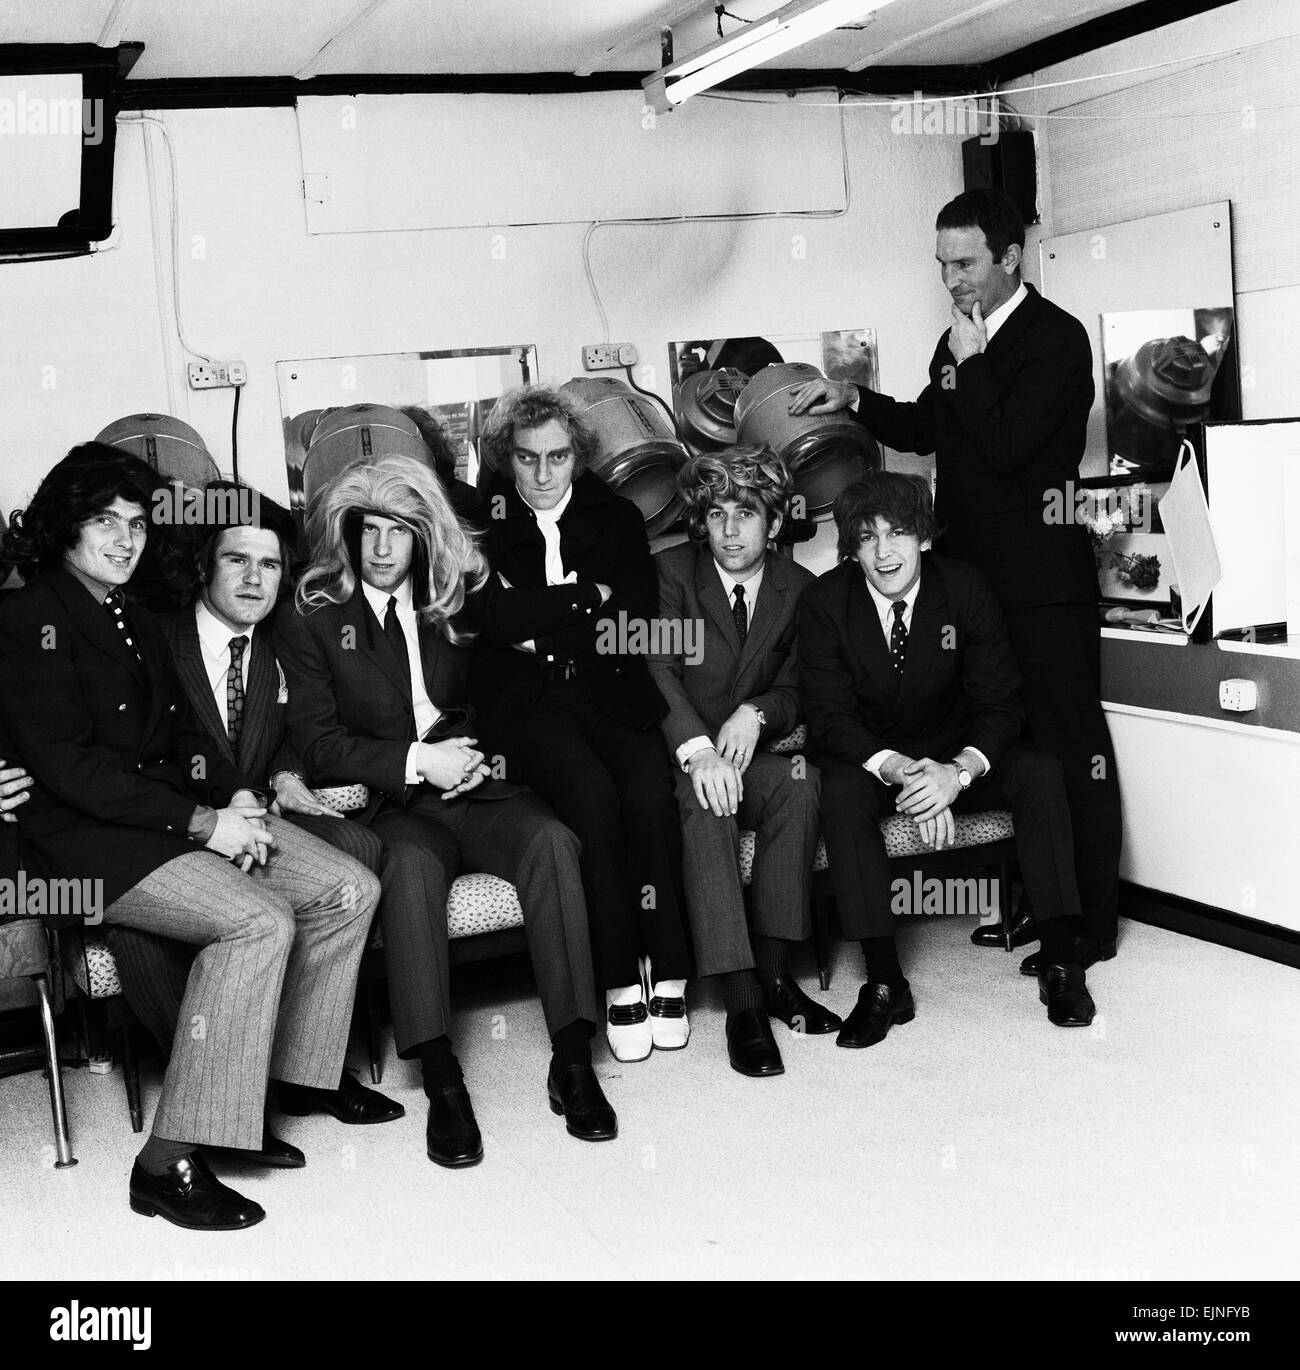 David Webb (right standing) seen here with fellow Chelsea players Peter Osgood Marvin Hinton Dave Sexton Charlie Cook Tommy Baldwin and comedian Marty Feldman (centre) at the opening of a wig boutique and hairdressers in Chelsea. 17th November 1969 Stock Photo